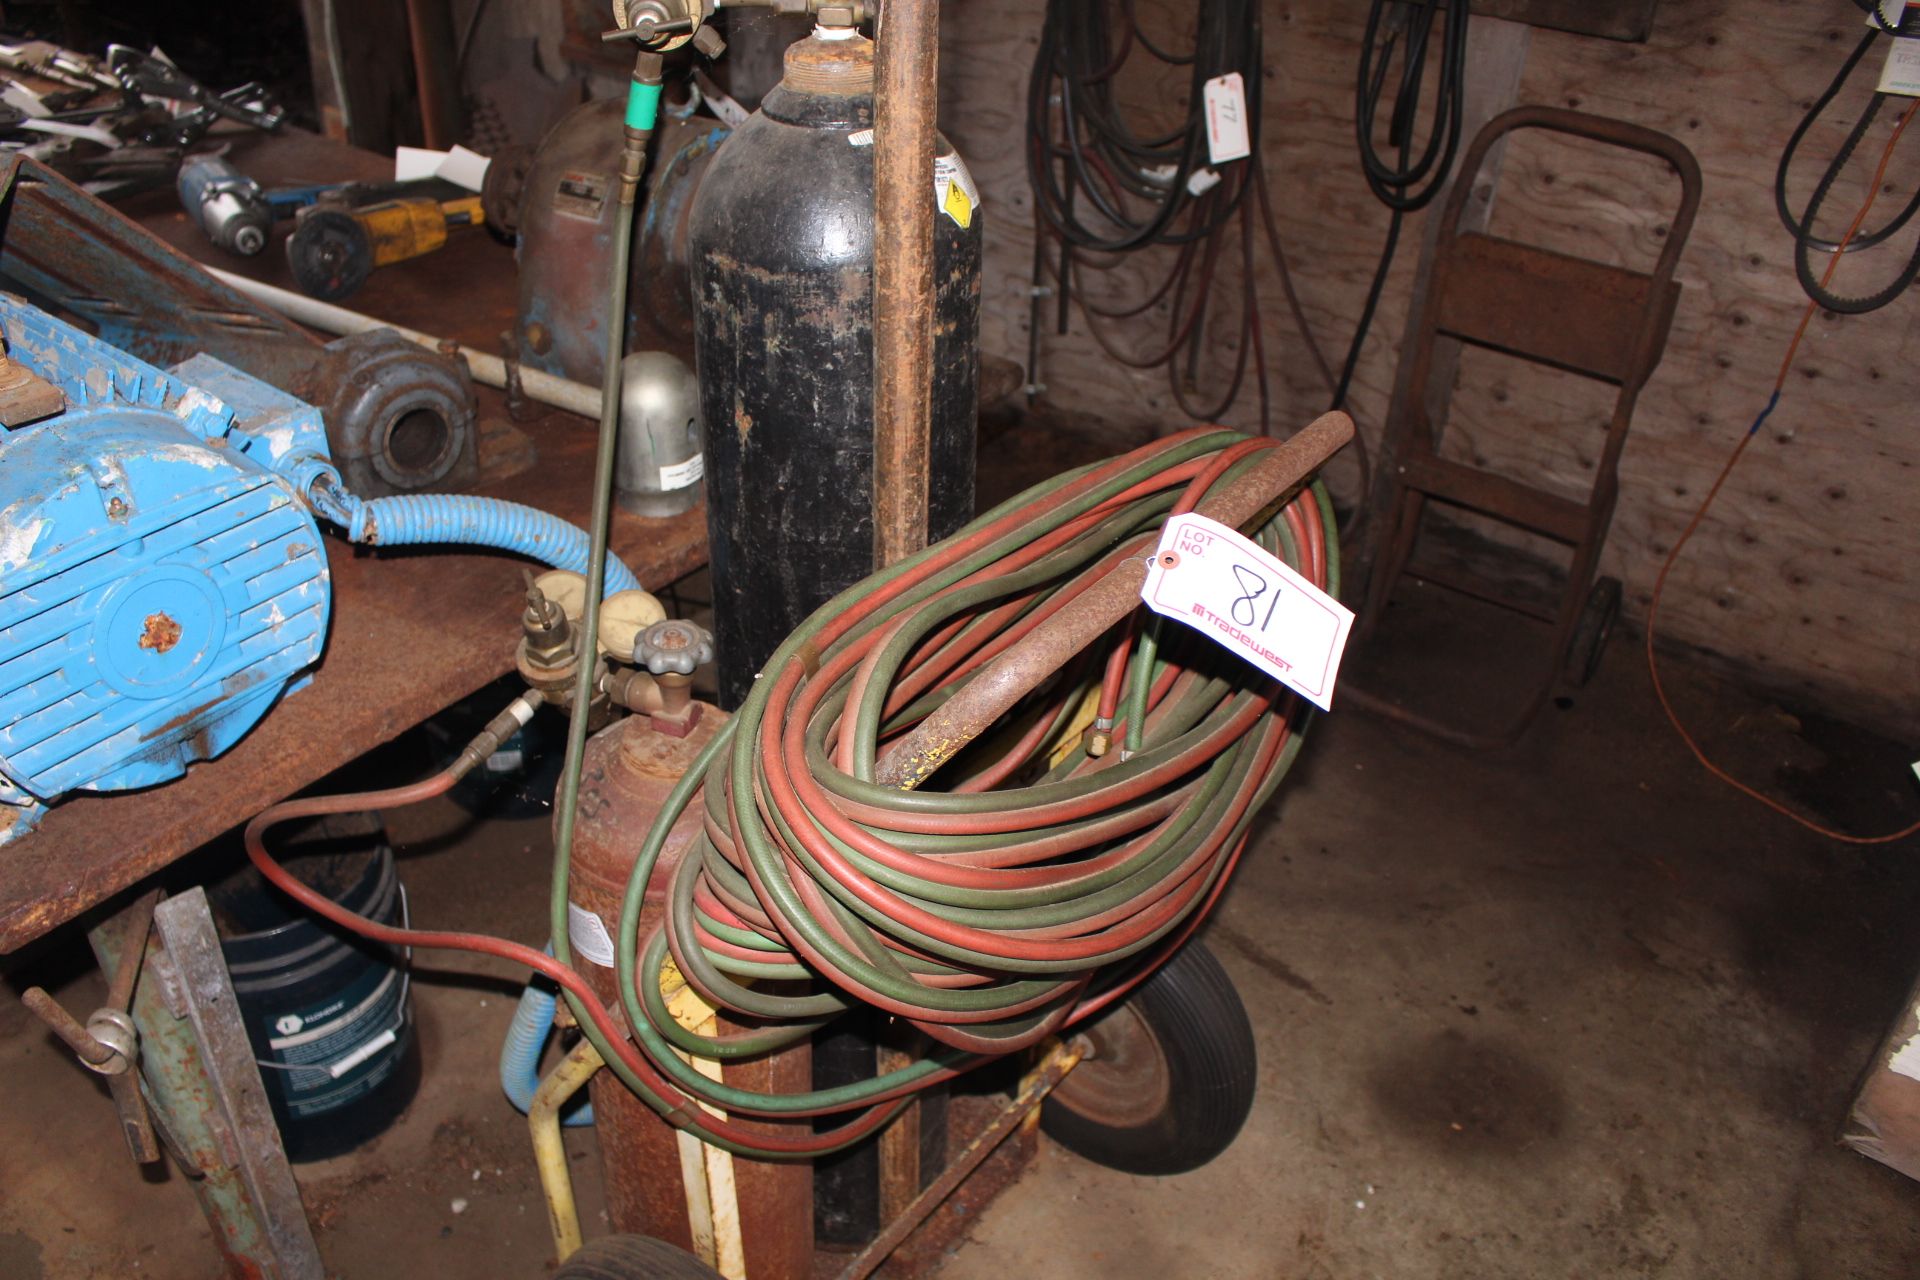 OXY-ACETYLENE SET W/ GAUGES, TORCHES, HOSES & CART (EXCLUDES BOTTLES)